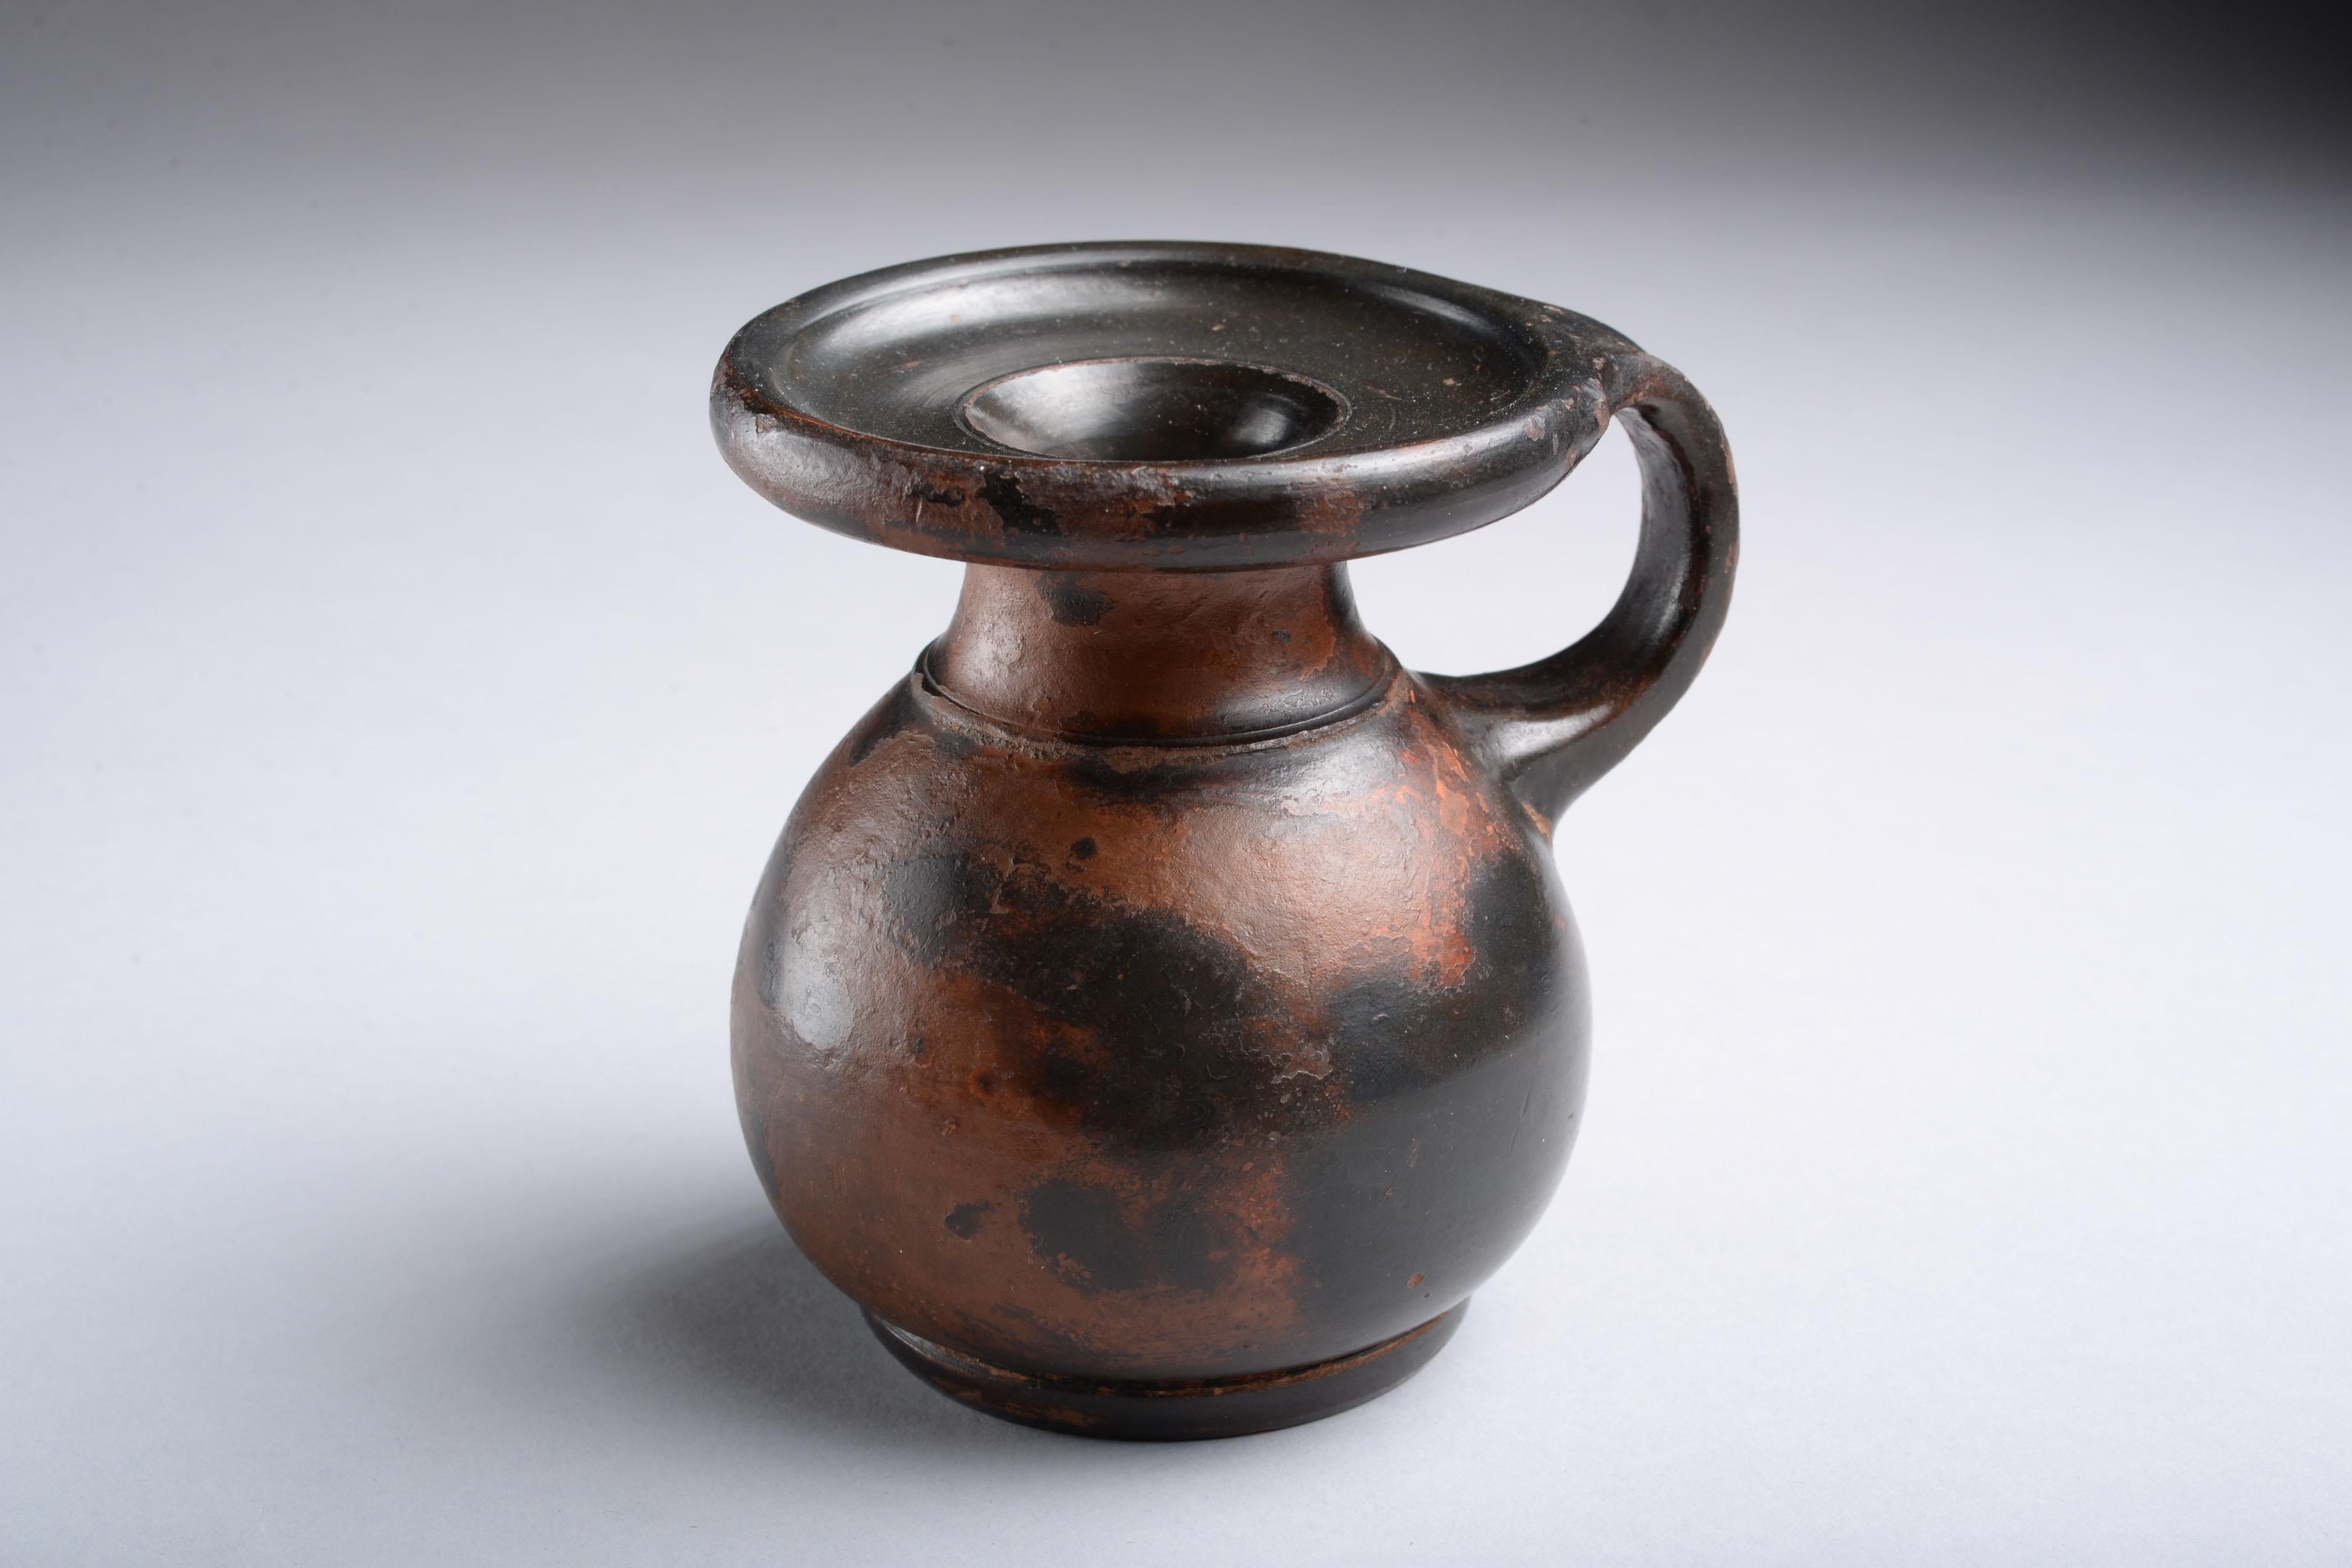 Athenian Black-glaze perfume pot with inscription
Athens, c. 425-400 B.C.
Terracotta
Measures: Height: 9cm; diameter across lip: 7.5cm; width including handle: 9cm

This 5th Century B.C. perfume pot from Athens is a fine testament to the